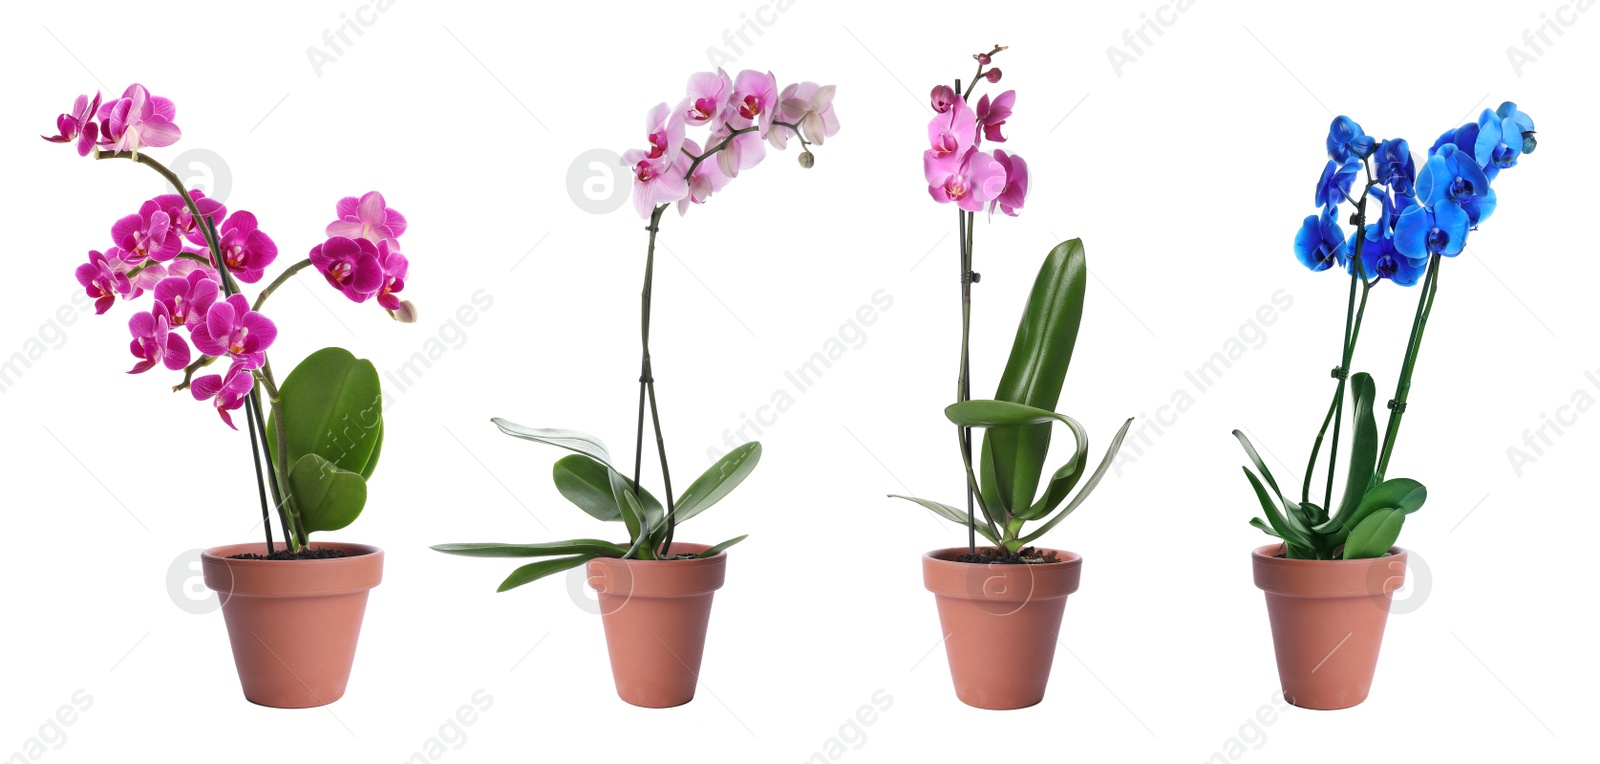 Image of Set of blooming orchid plants in flower pots on white background. Banner design